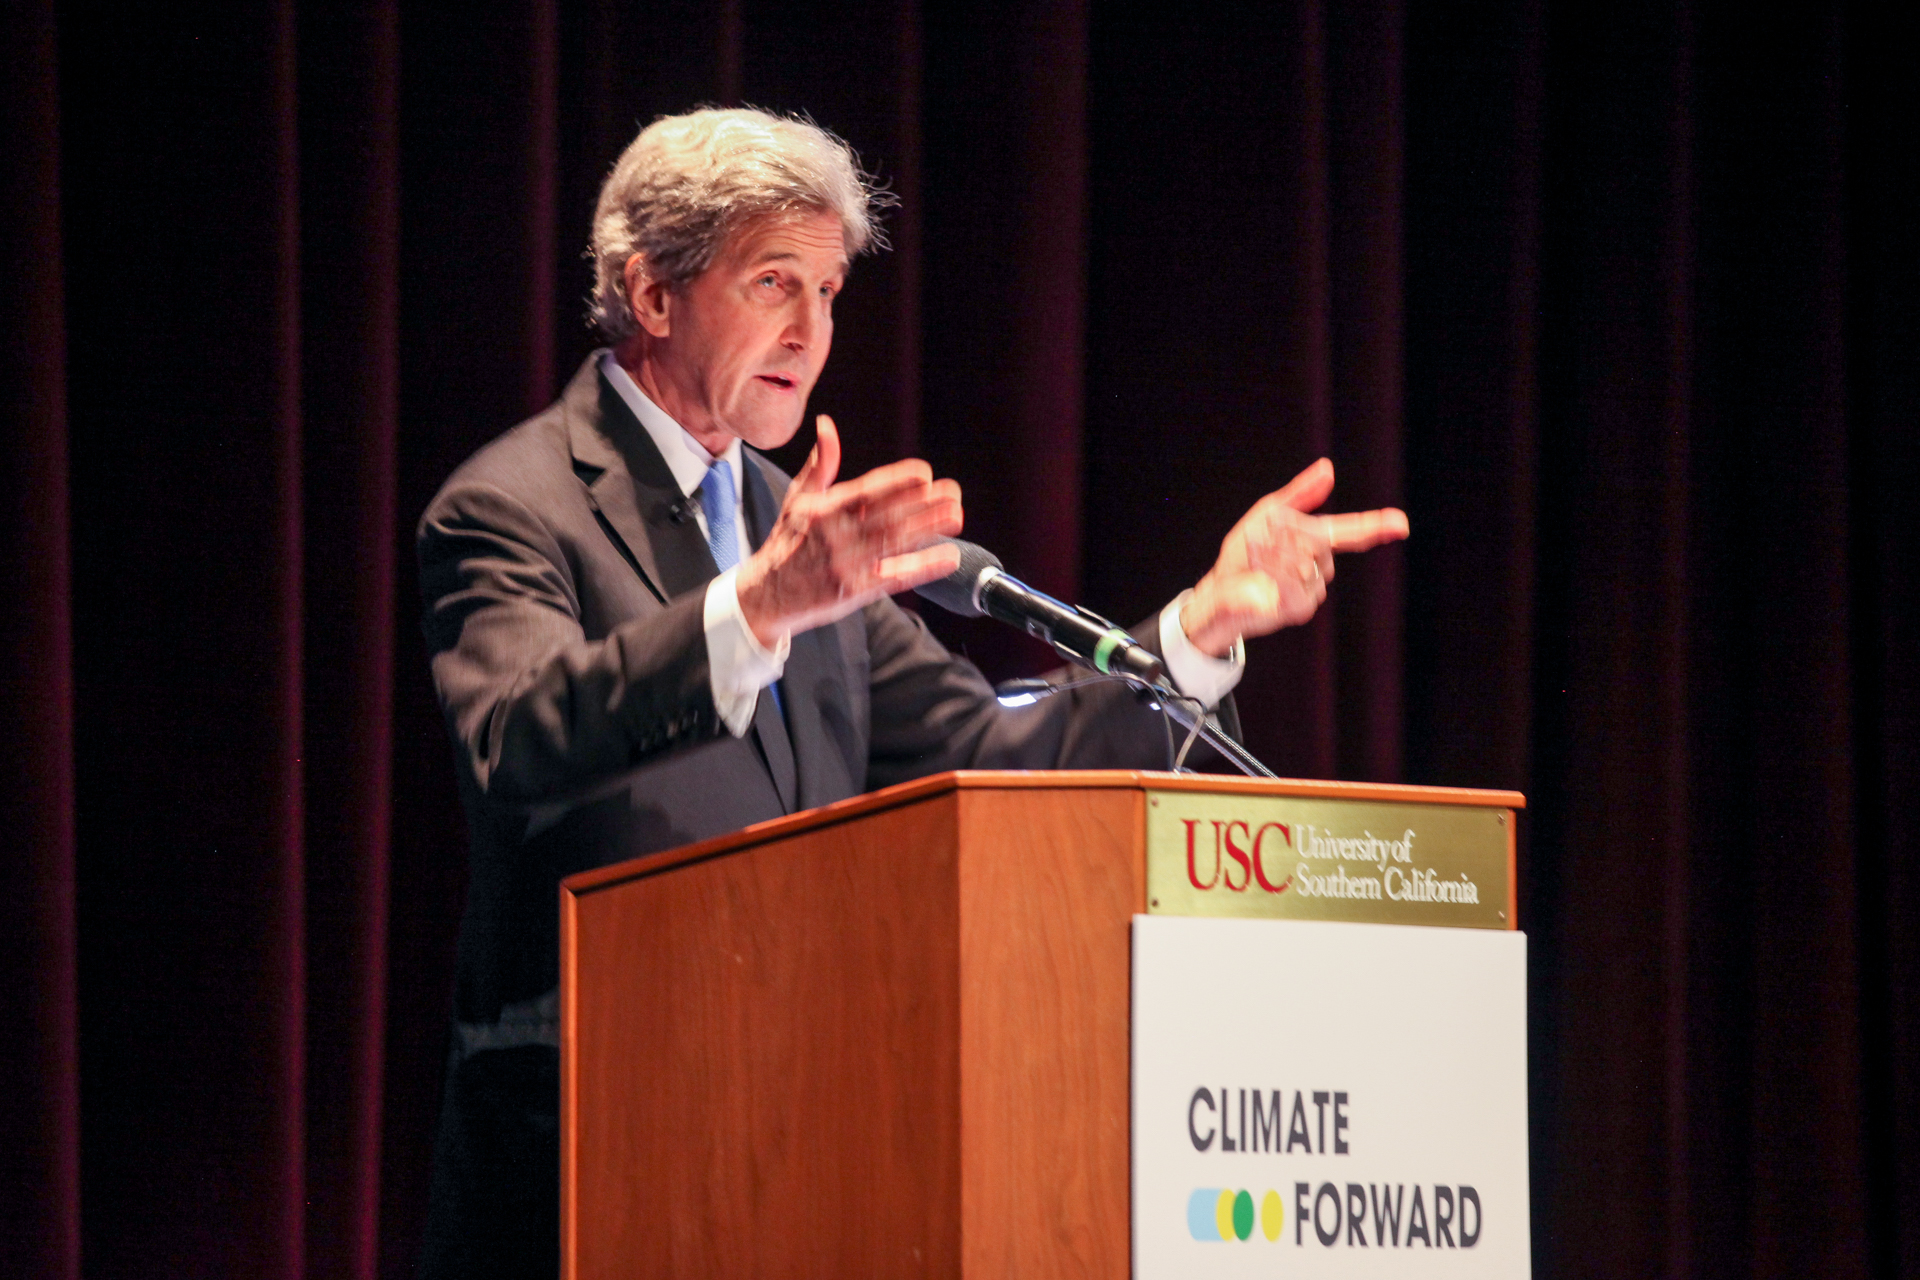 John Kerry speaking from a podium at the Climate Forward conference.